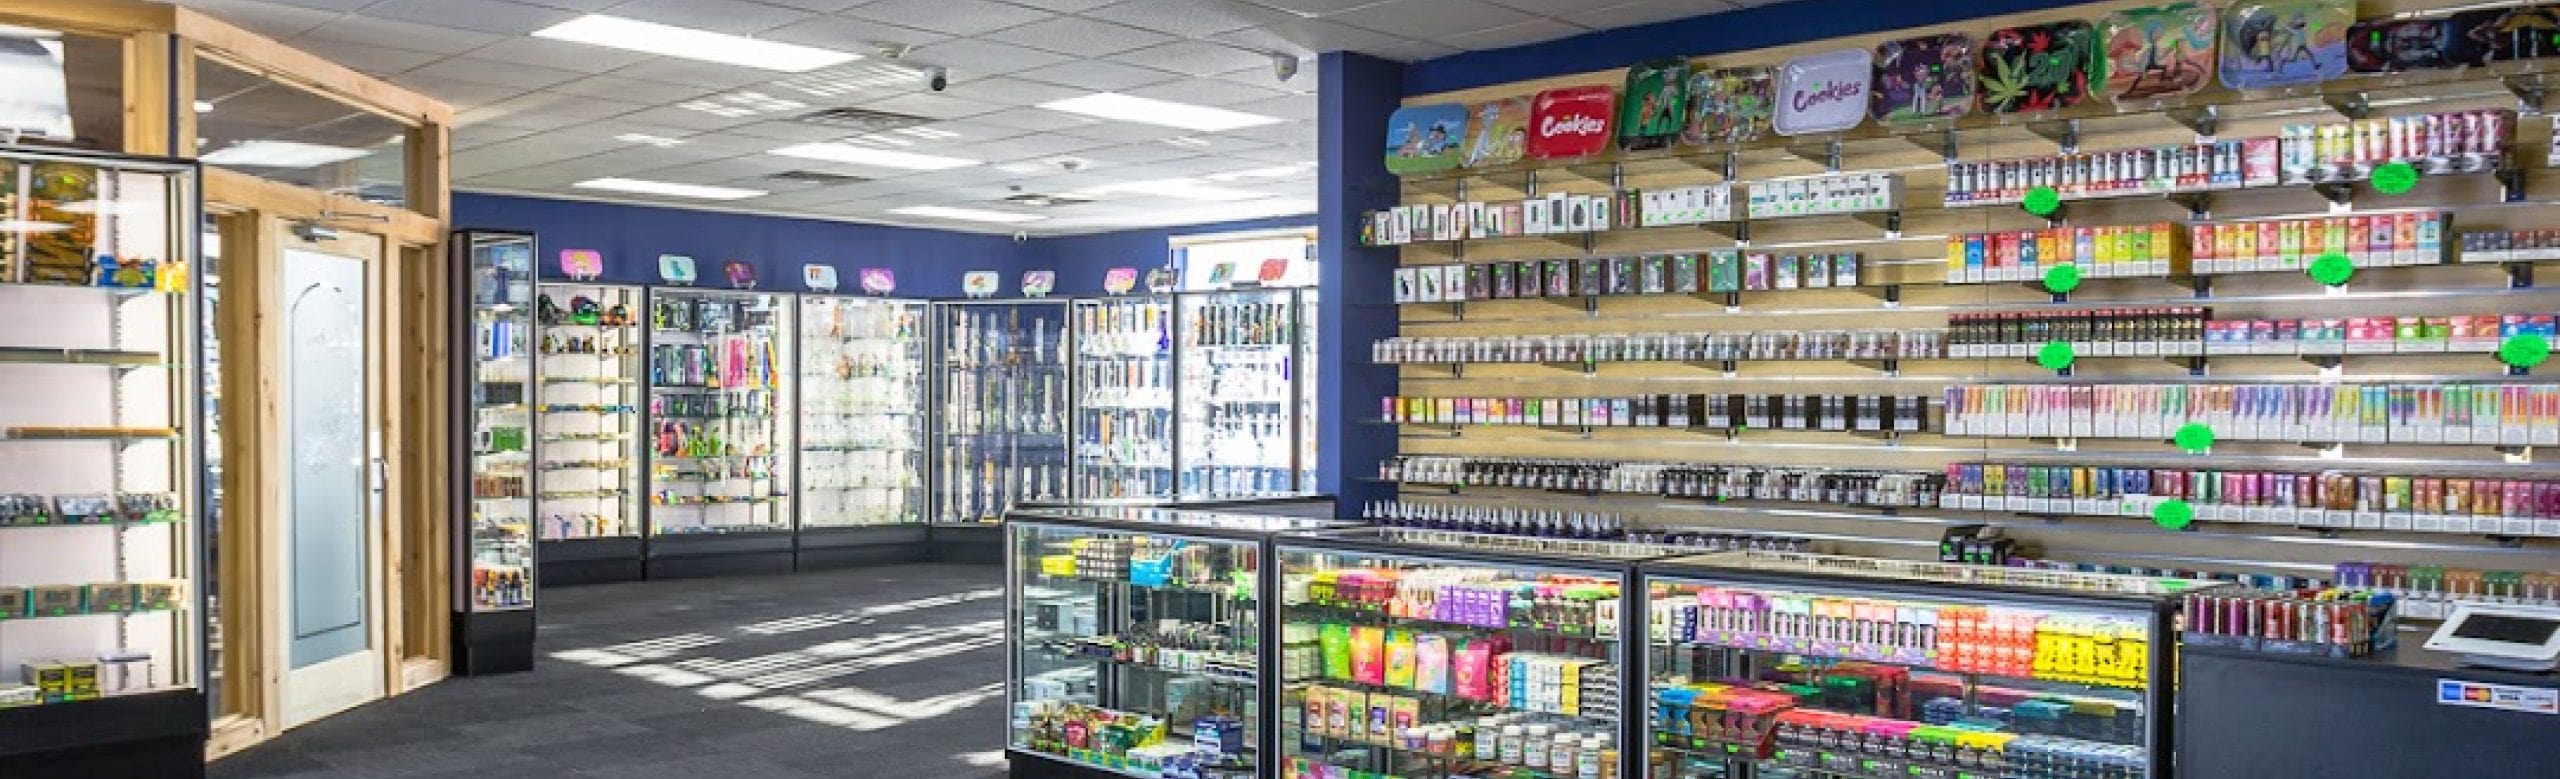 image of hunky dory smoke shop in eugene or